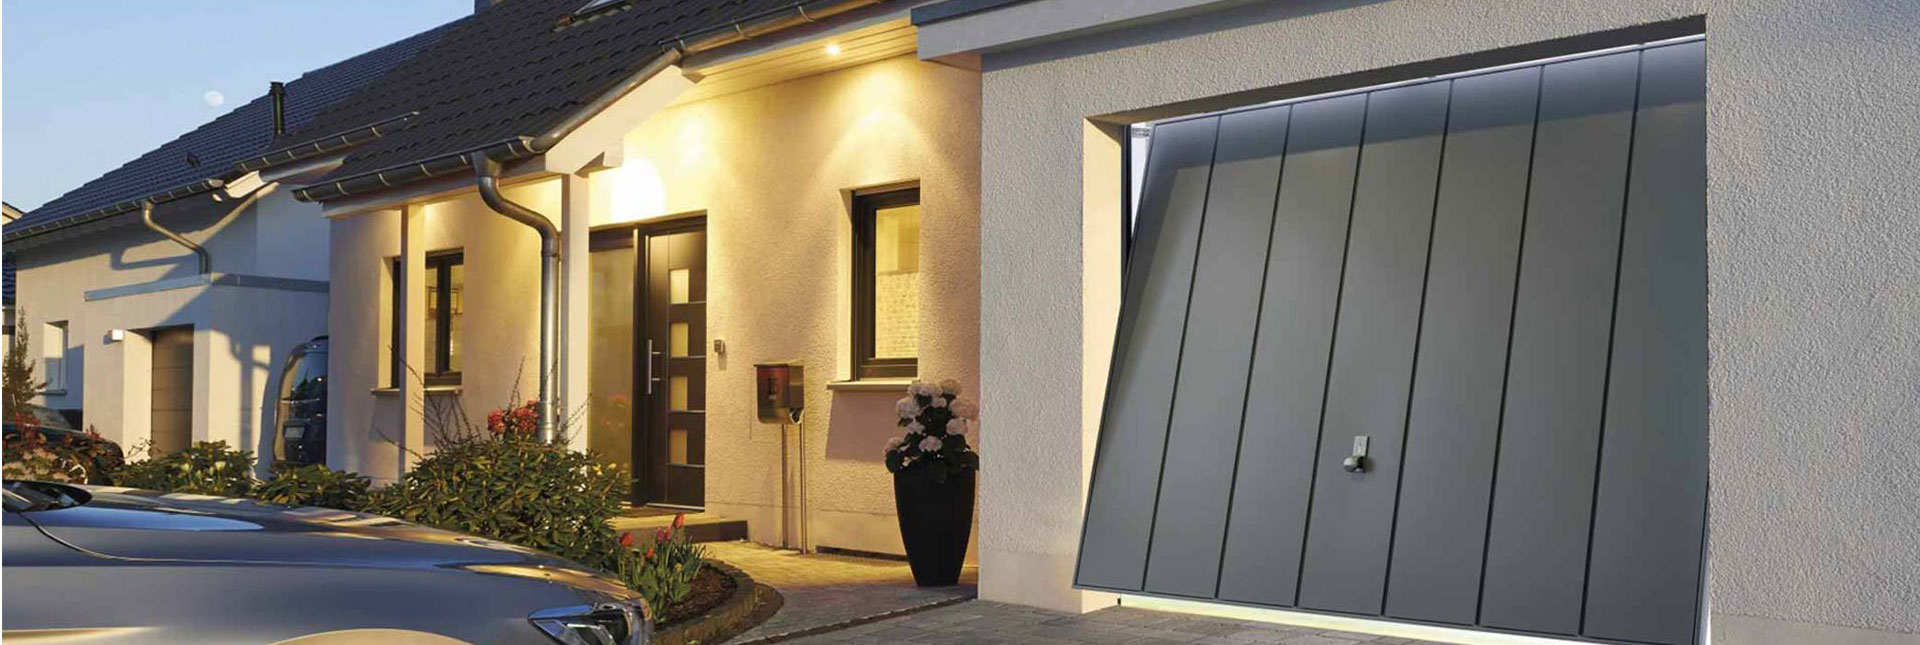 21Q&A: How much does a new garage door cost?